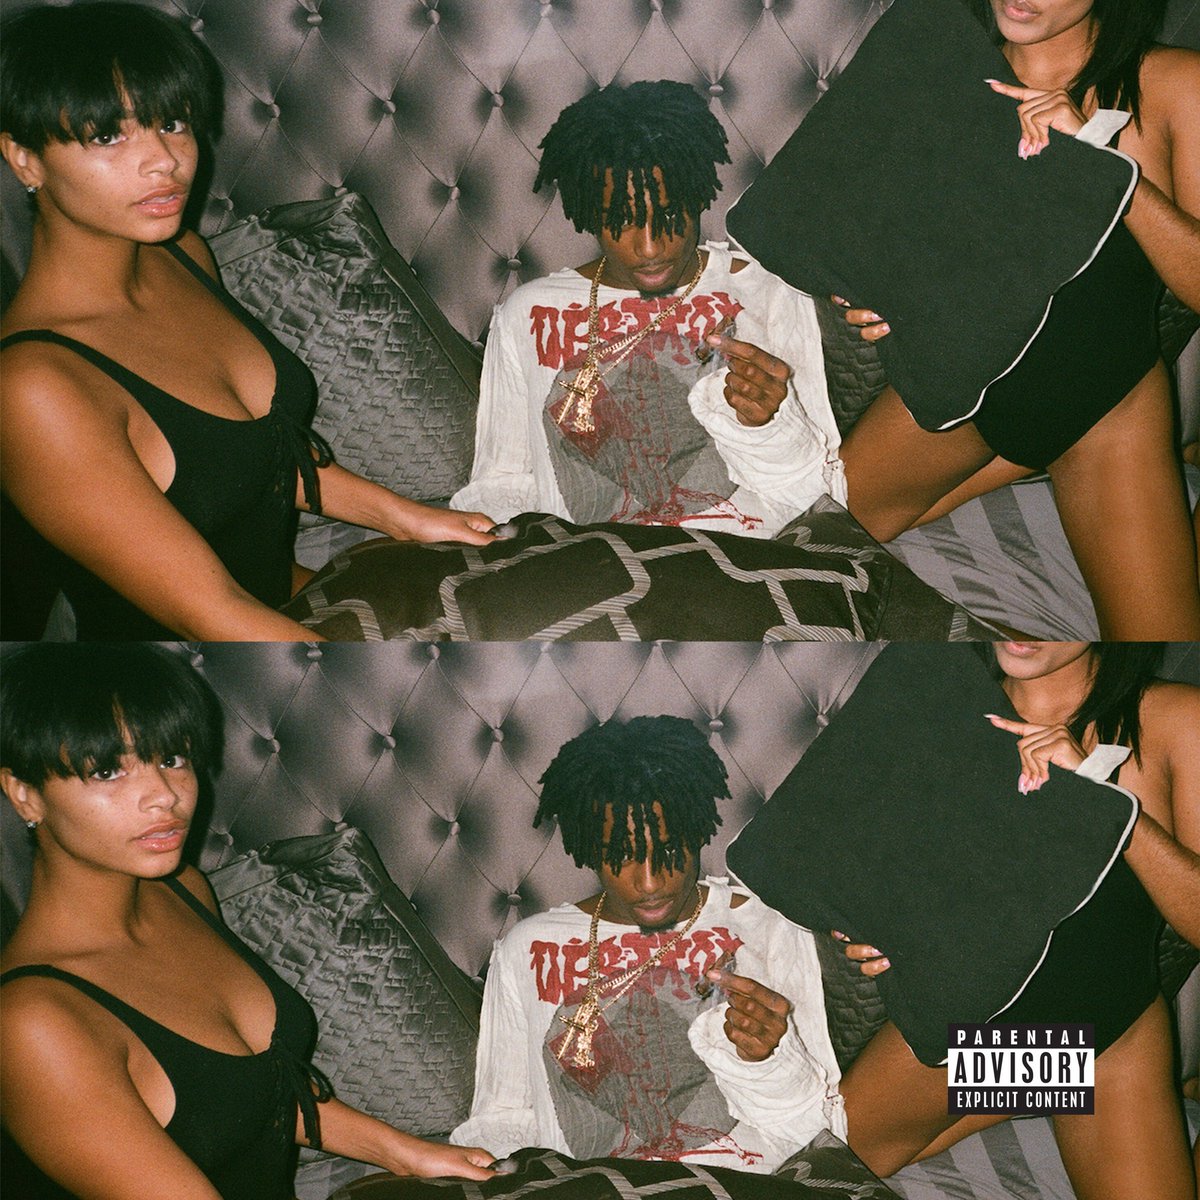 7 years ago today, Playboi Carti released his self-titled debut album ‘Playboi Carti' 🦋 What’s your favorite song on the album? 💽